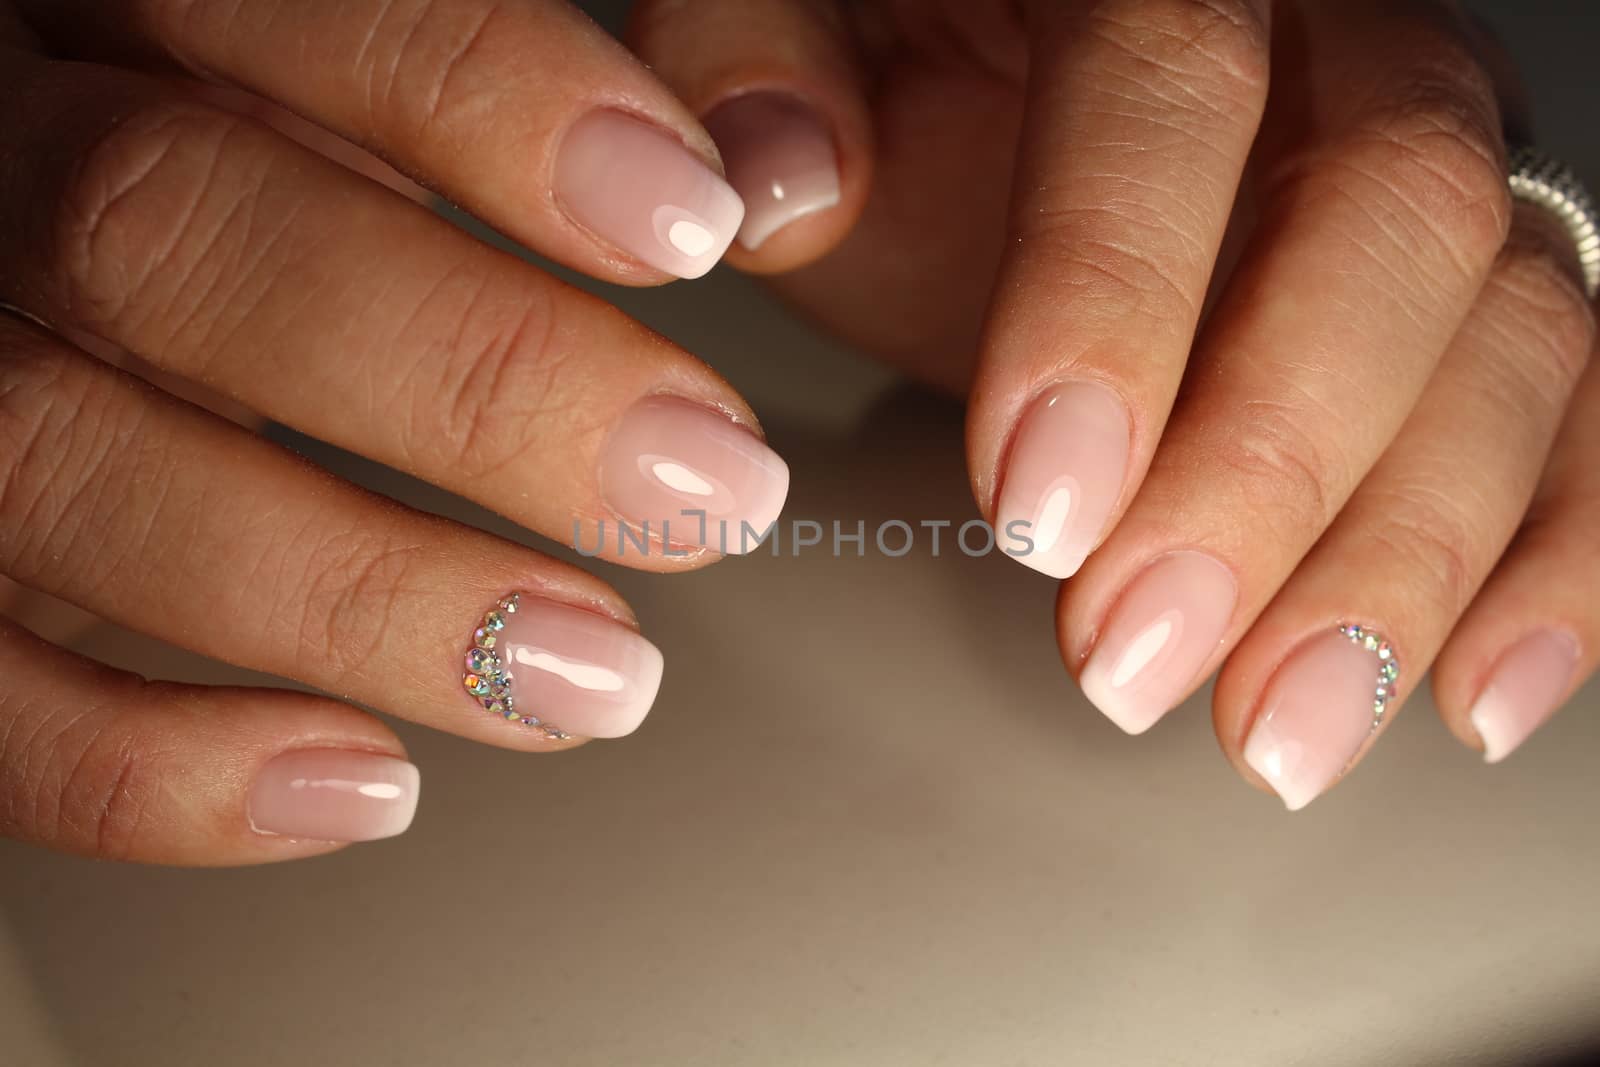 Manicure design gel with white lacquer French